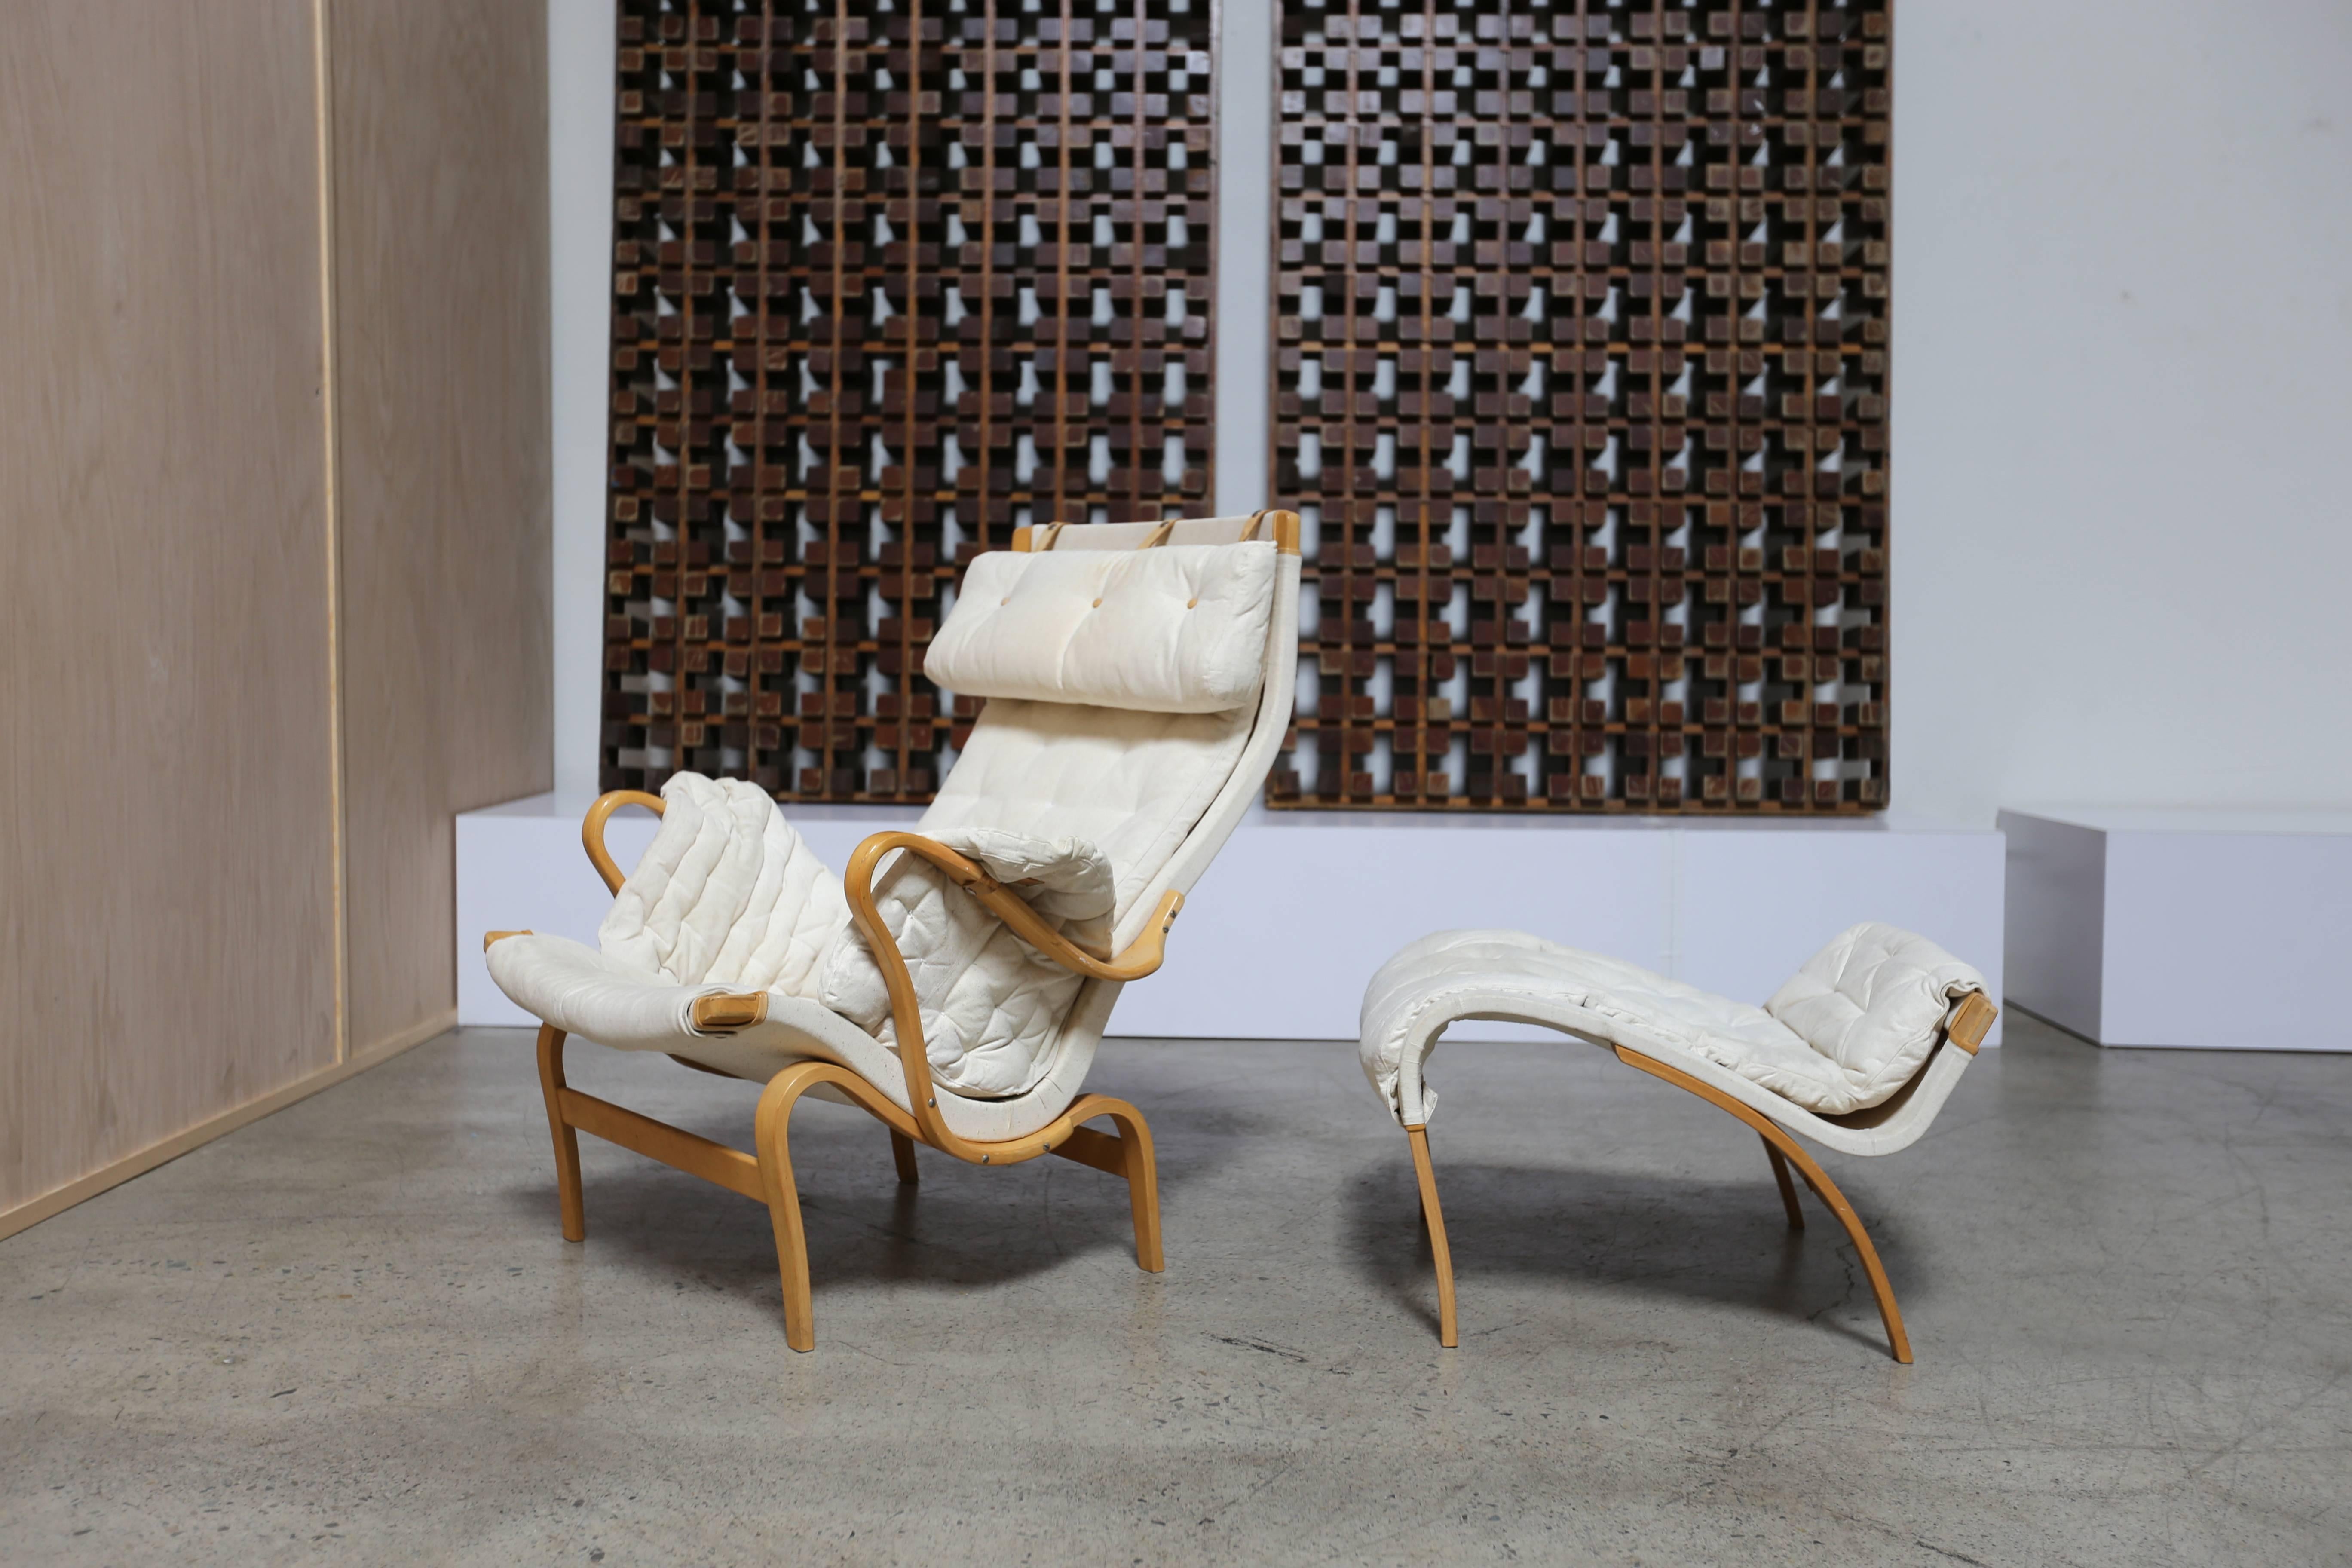 Bentwood Pernilla lounge chair and ottoman by Bruno Mathsson. 

The ottoman measures: 24.5